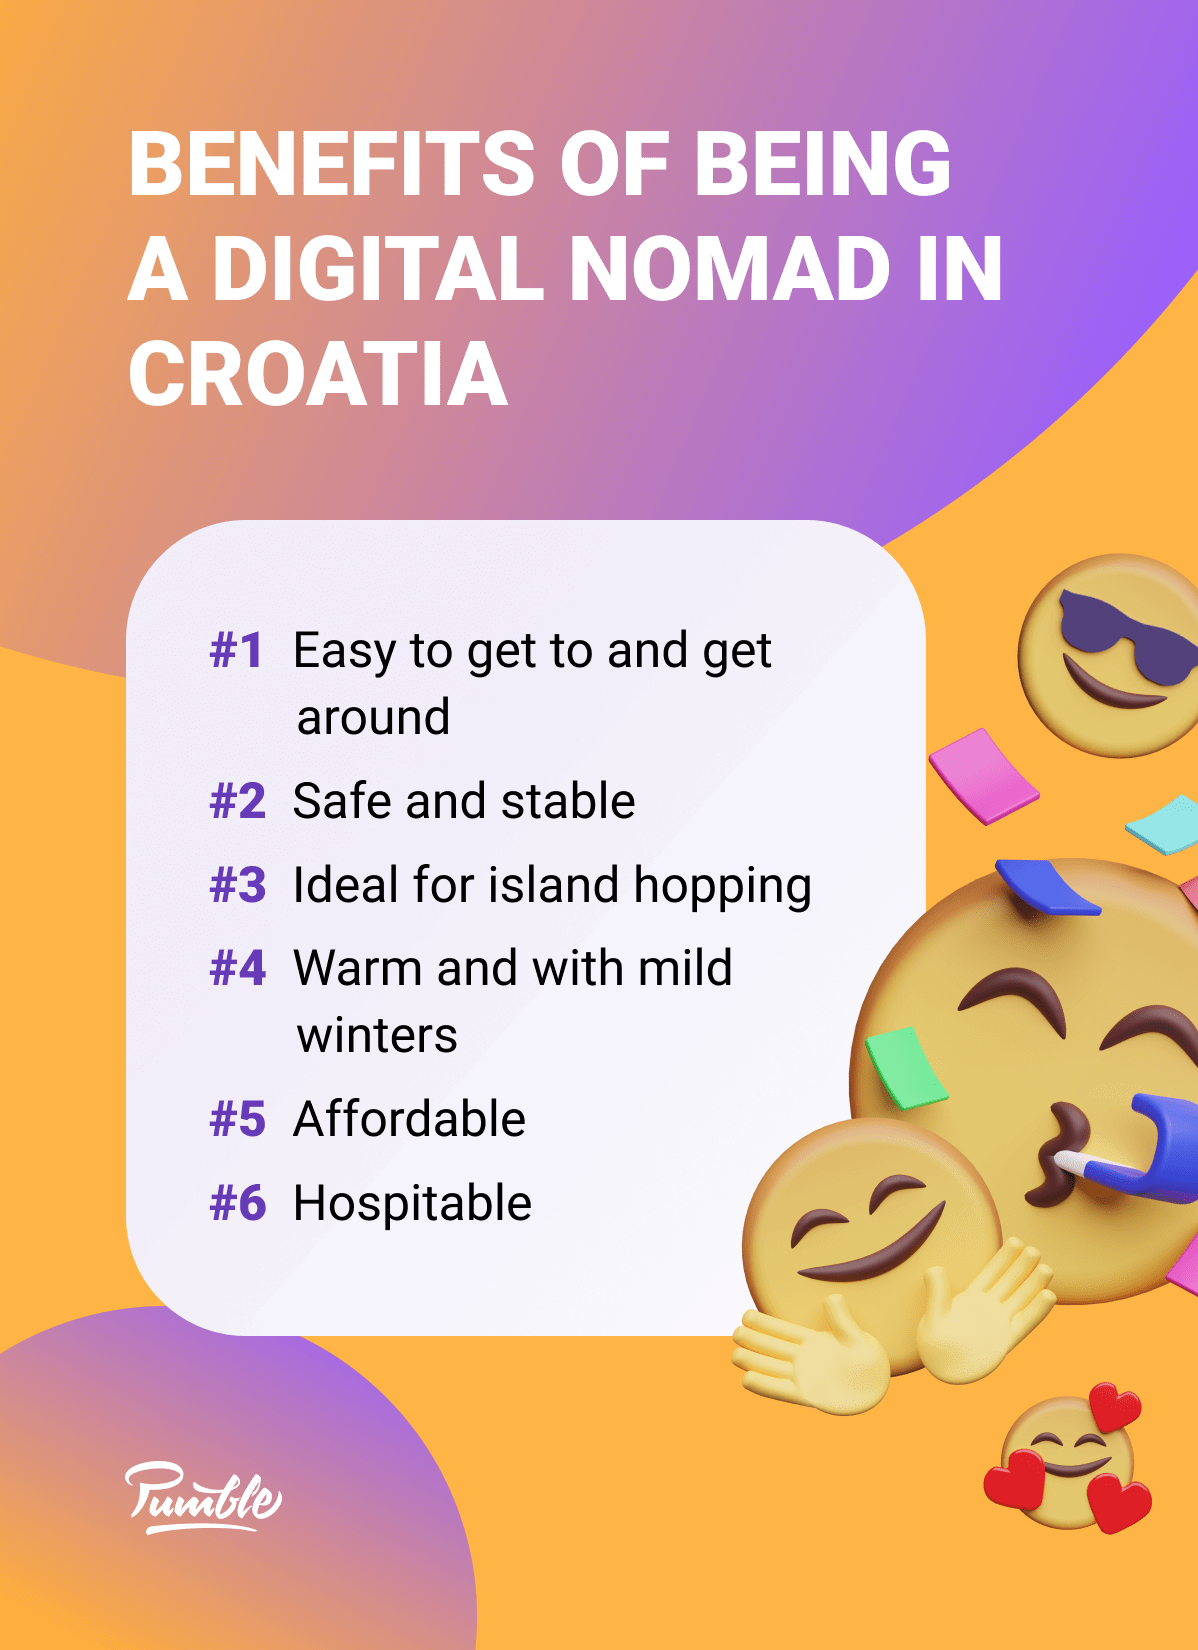 Benefits of being a digital nomad in Croatia